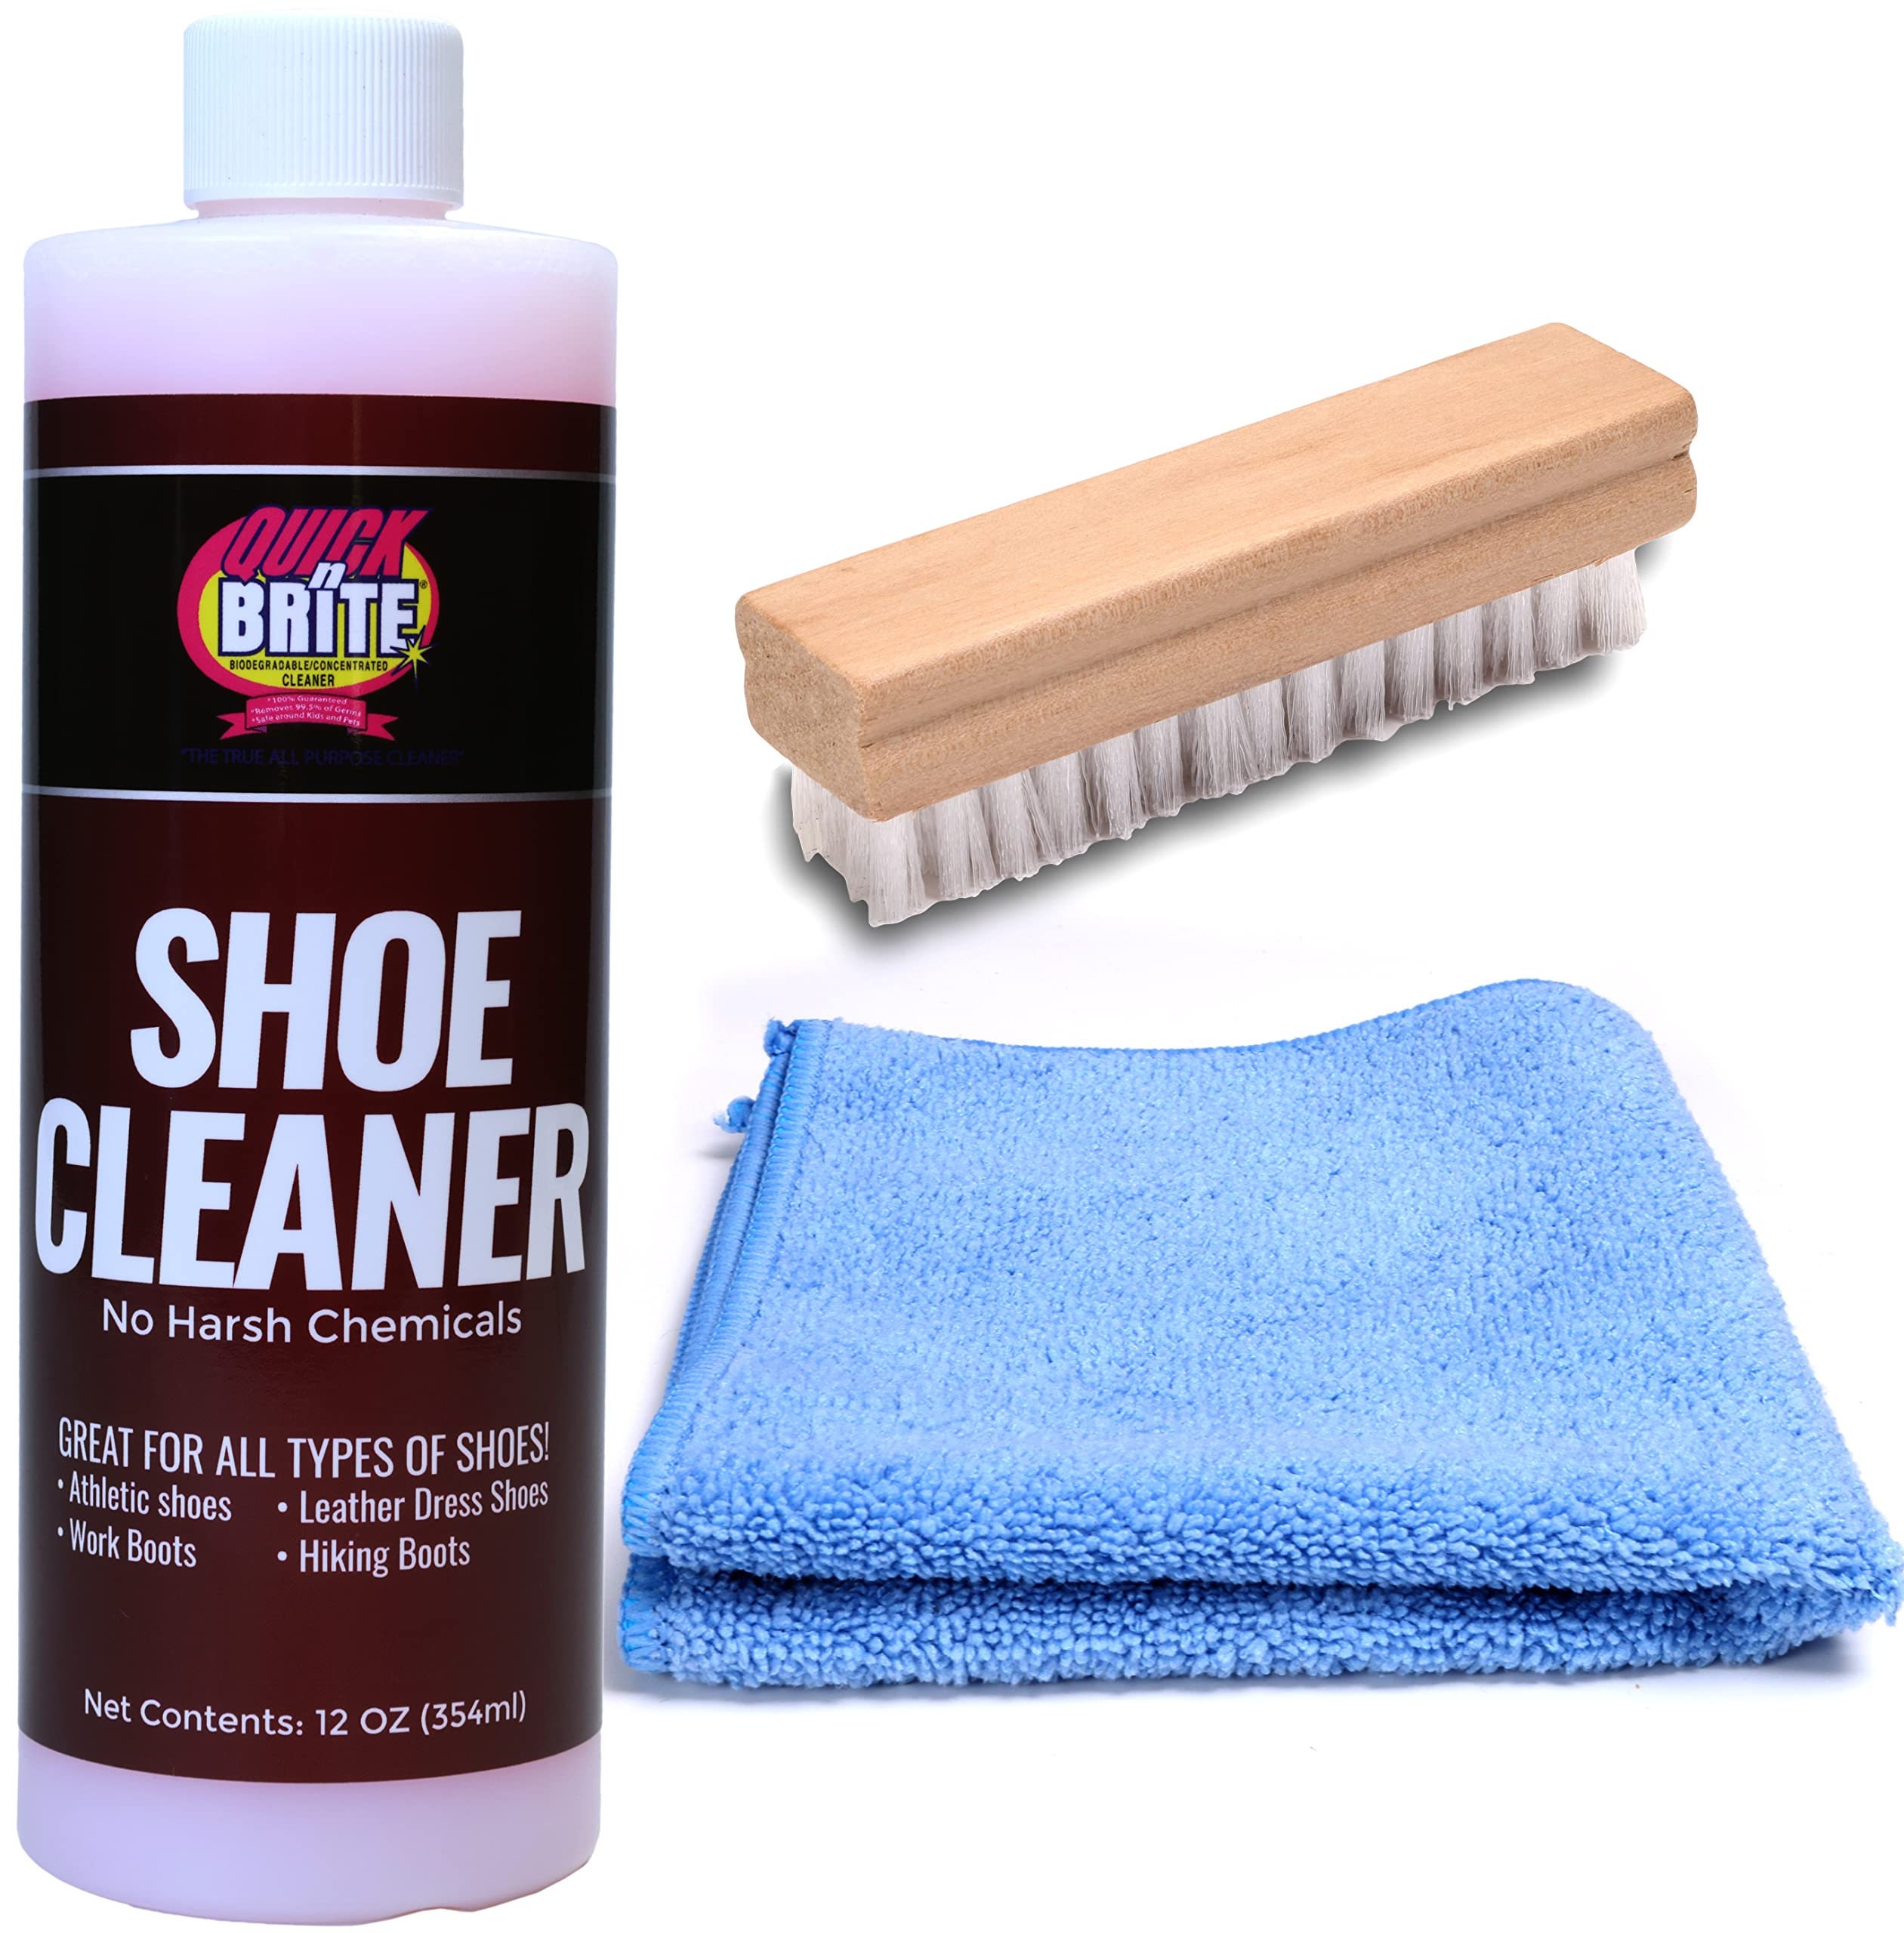 Refreshed Shoe Cleaner - 2x 4oz Cleaning Solution, 1x 4oz Stain Repellent,  1x 4oz White Shoe Cleaner Paint, 1x Brush - Easily Clean Suede, Leather